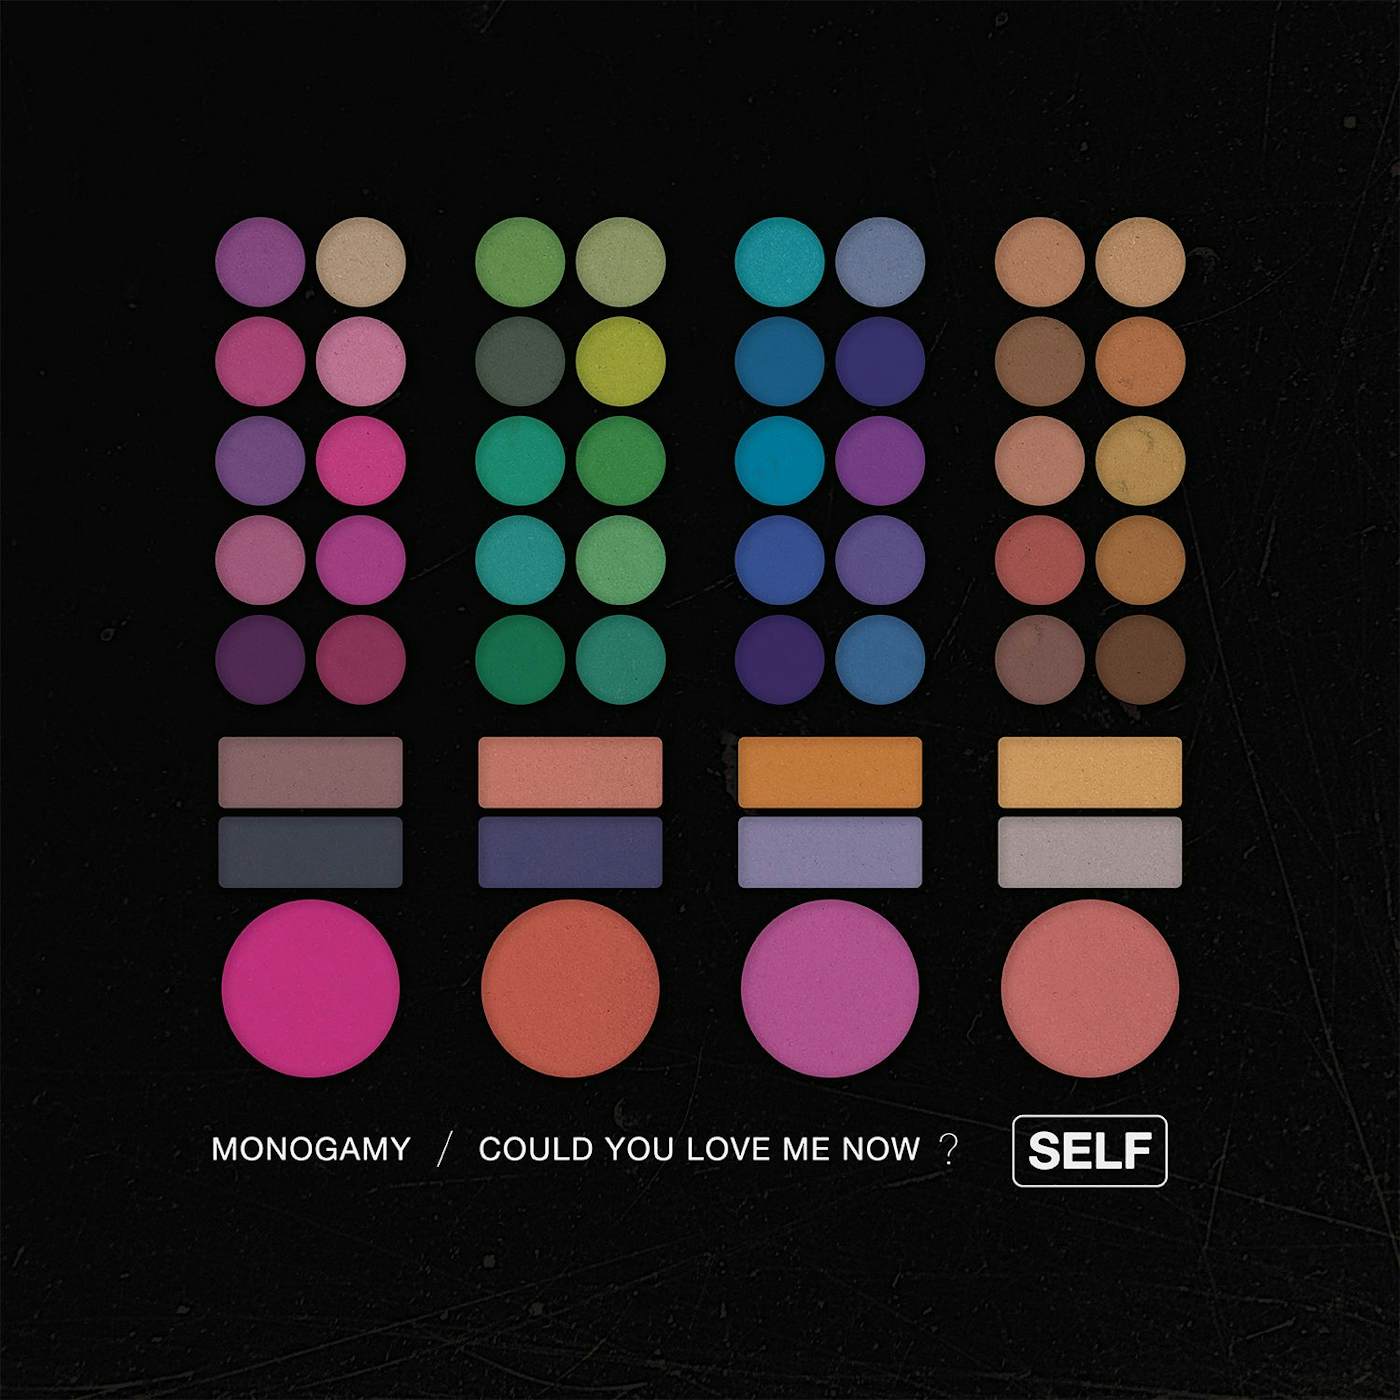 Self Monogamy/Could You Love Me Now Vinyl Record